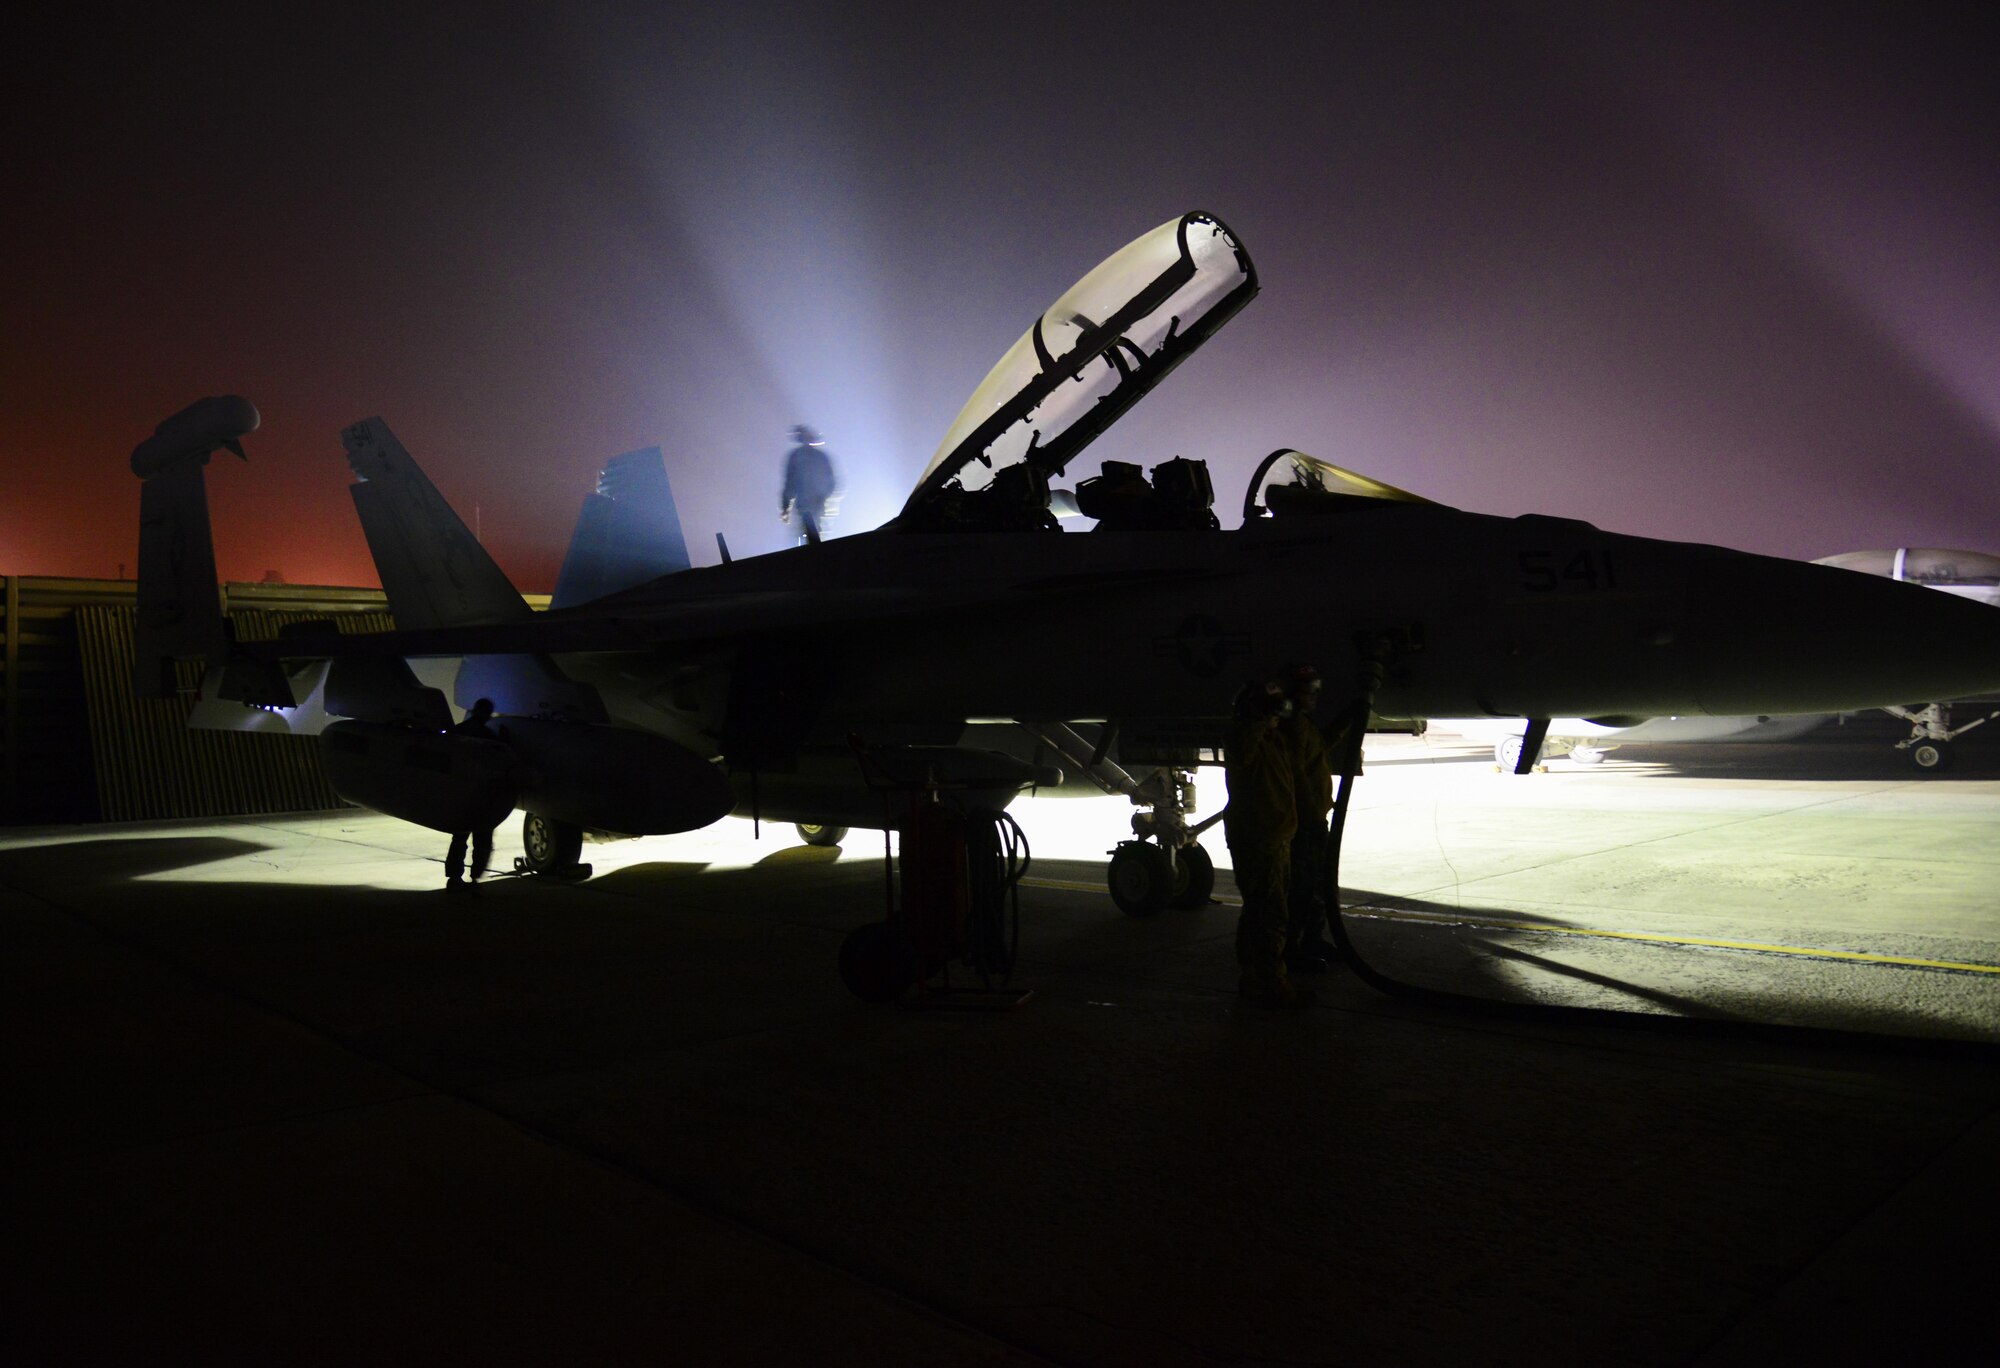 A Navy aviation electronics technician walks the spine of an EA-18G Growler as part of an inspection on the aircraft during exercise Vigilant Ace 16 at Osan Air Base, Republic of Korea, Nov. 4, 2015. The EA-18Gs are at Osan are from the Electronic Attack Squadron (VAQ) 132 at Naval Air Station Whidbey Island, Wash. The EA-18G's vast array of sensors and weapons provides the warfighter with a lethal and survivable weapon system to counter current and emerging threats. Exercise Vigilant Ace 16 is a large-scale exercise designed to enhance the interoperability of the U.S. and Republic of Korea forces. (U.S. Air Force photo/Tech. Sgt. Travis Edwards)